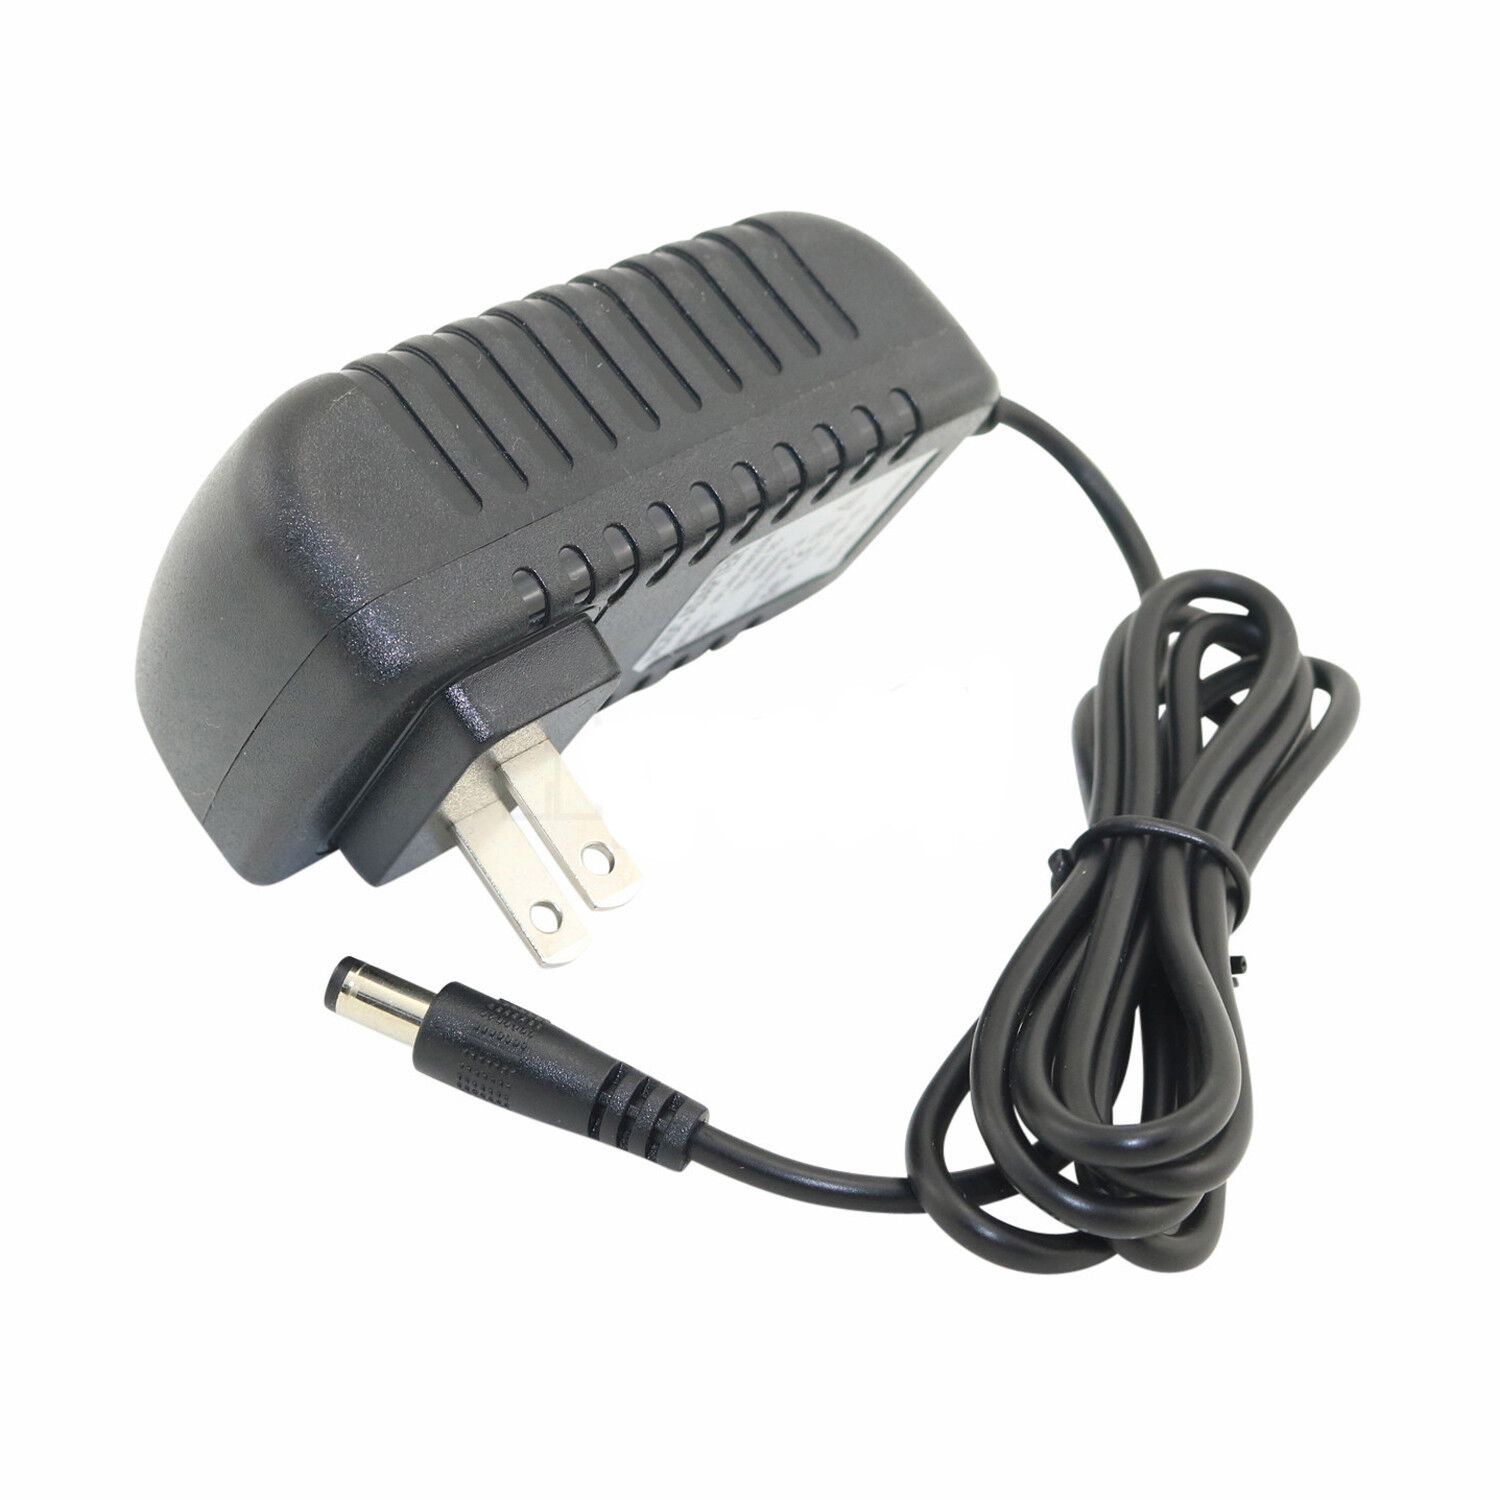 *Brand NEW*12V 5A 60W Adapter Charger ELO TouchSystems E005277 Power Brick and Cable Kit POWER Supply